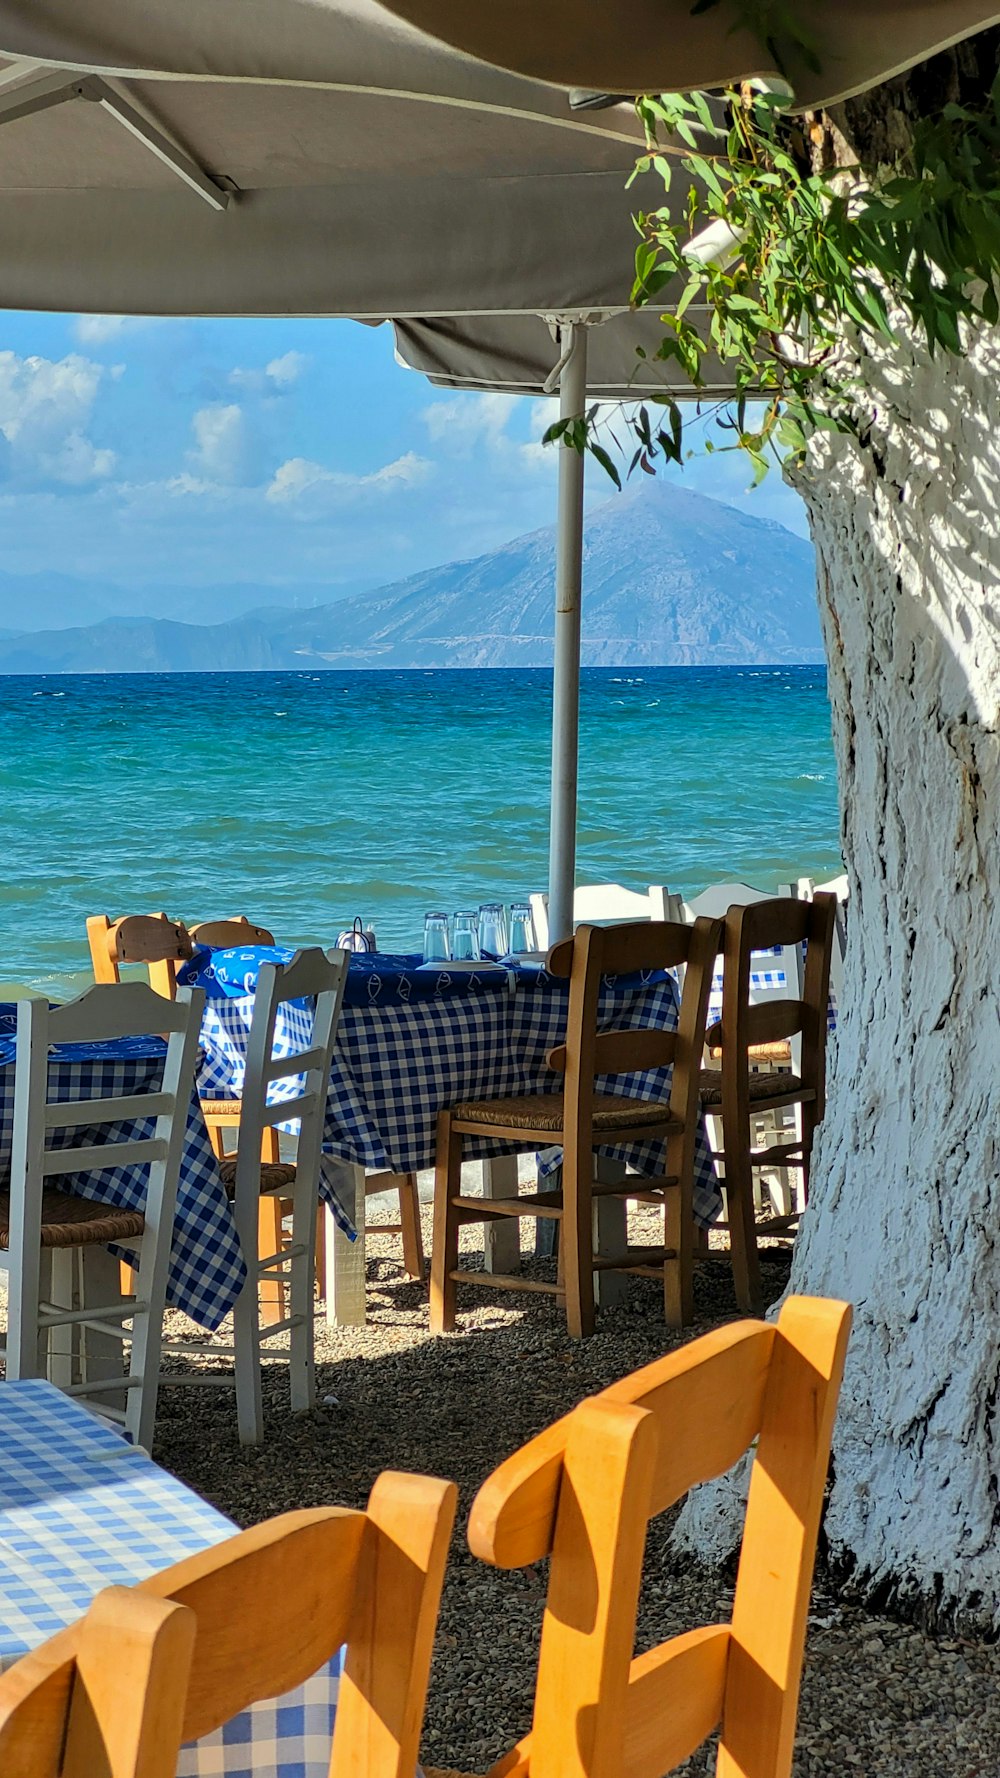 a table and chairs under an umbrella on the beach